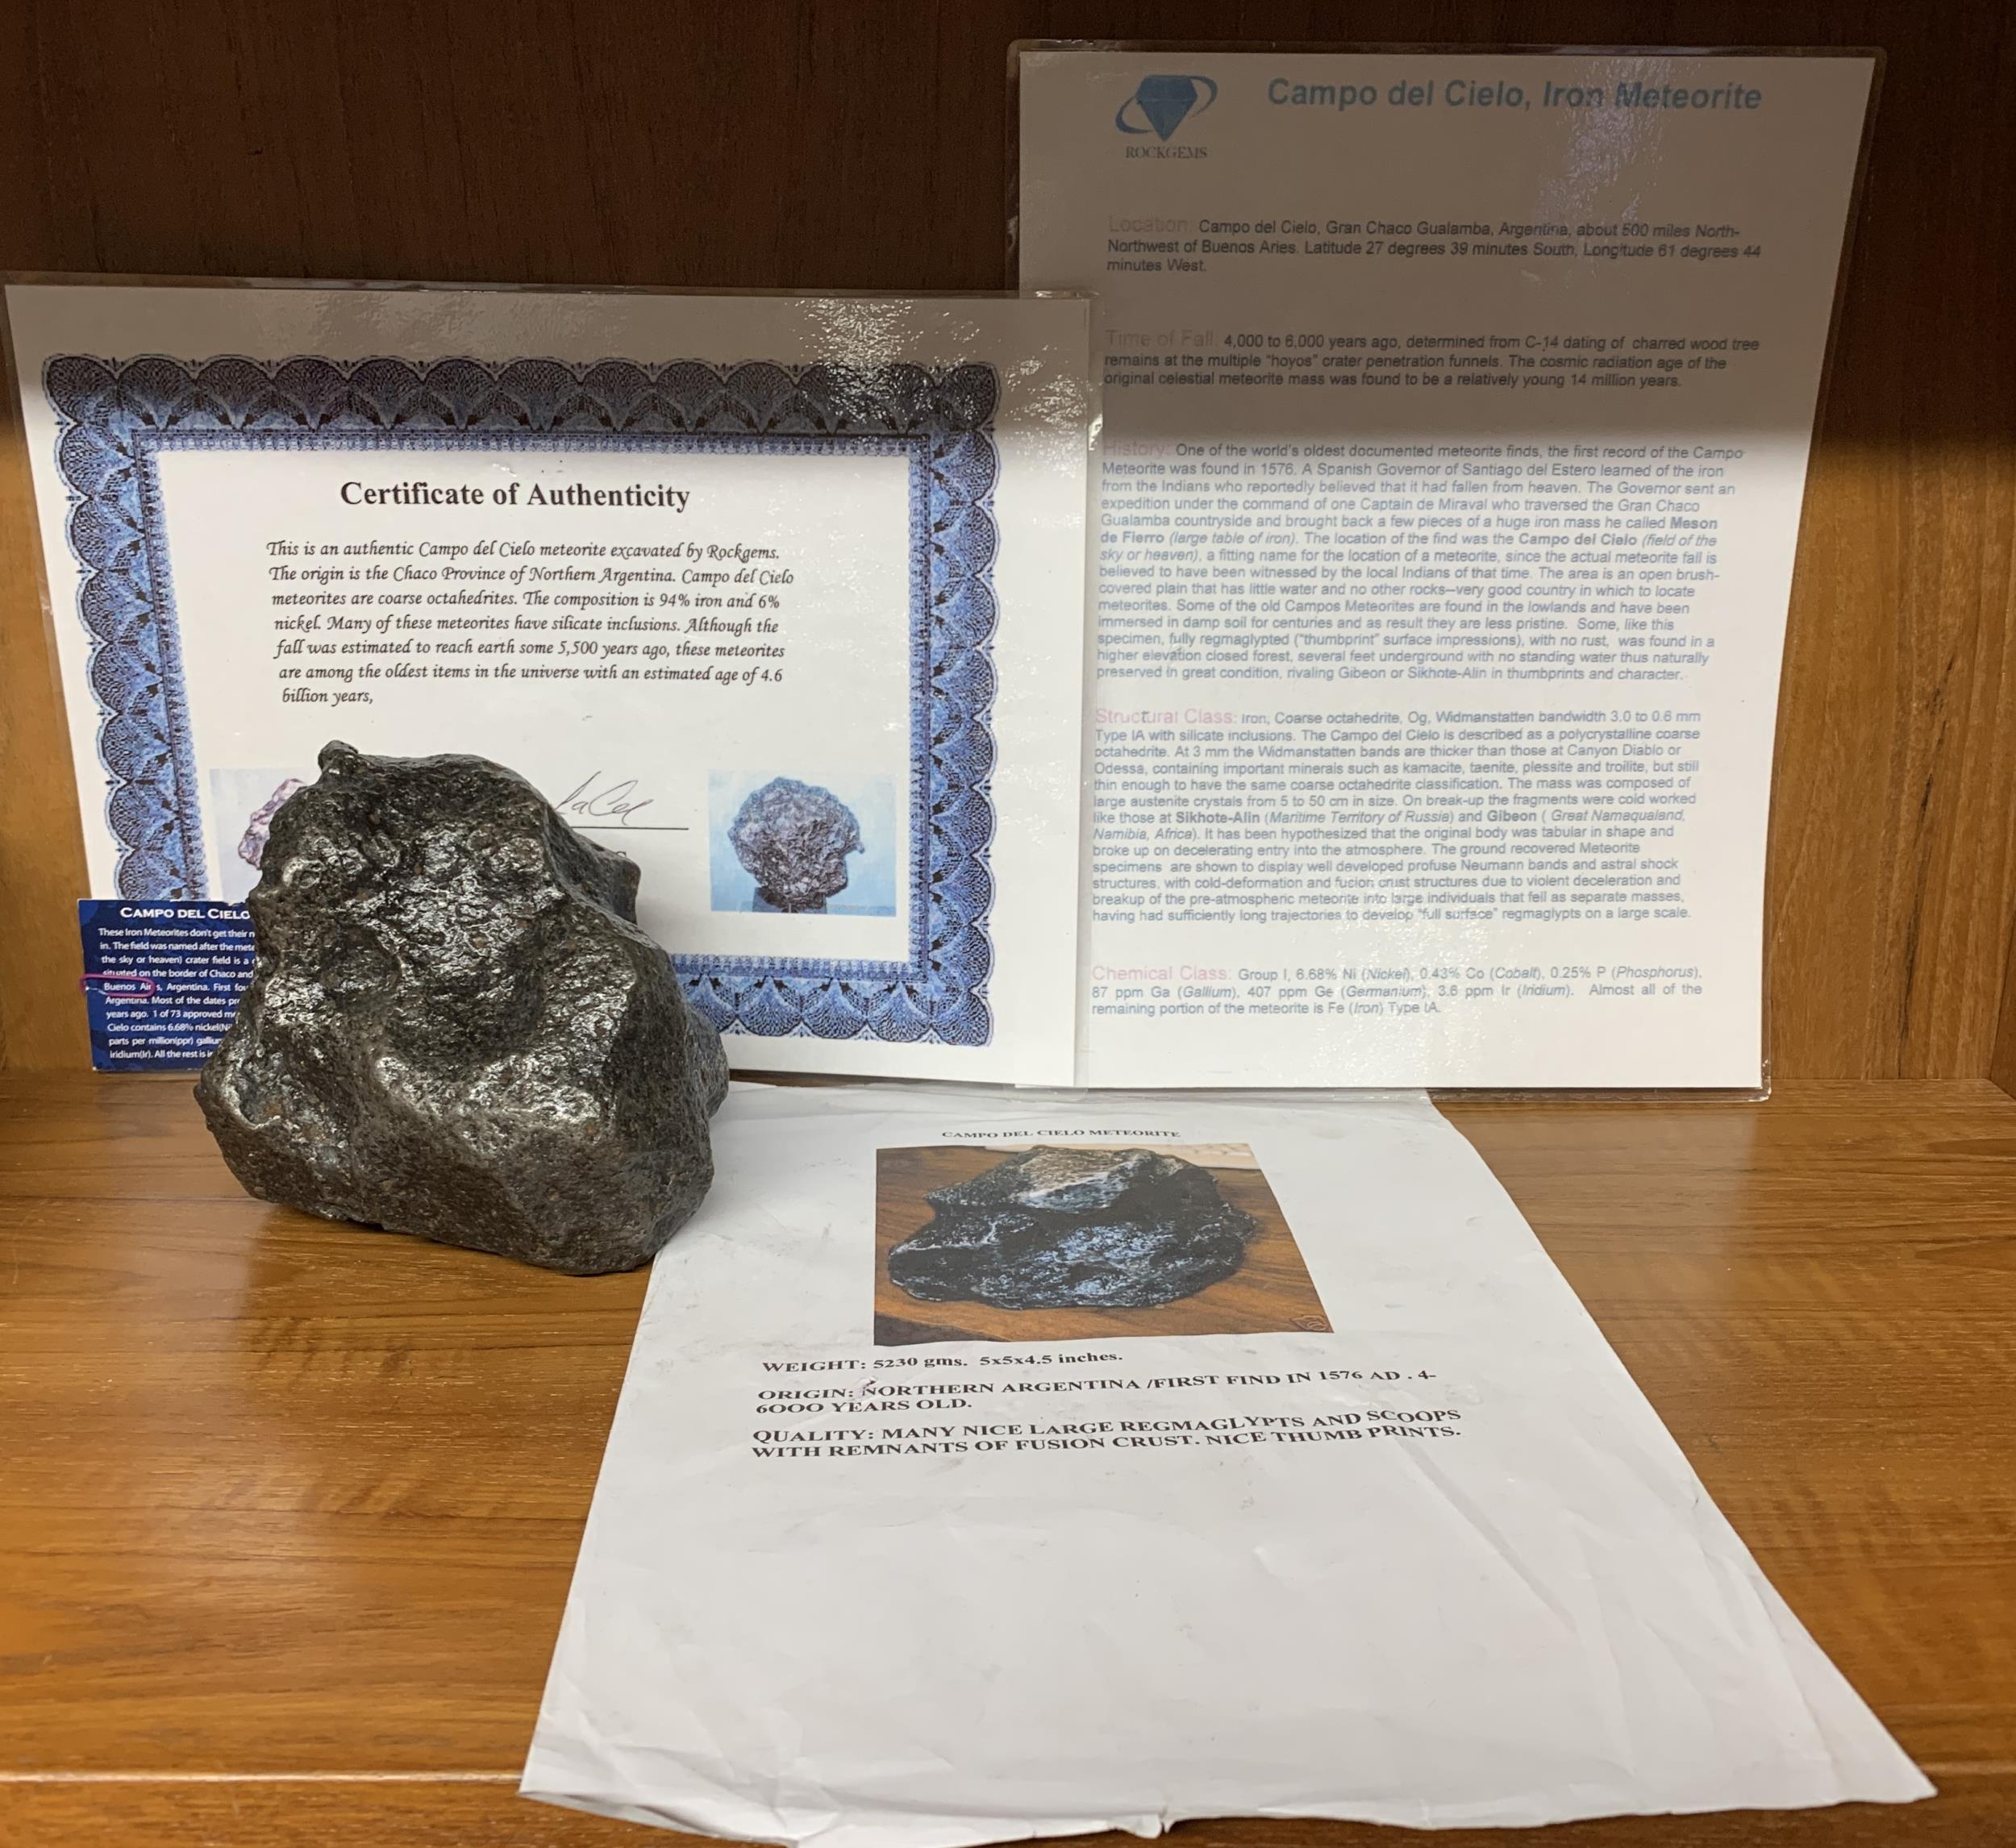 A 5KG CAMPO DEL CIELO IRON METEORITE WITH CERTIFICATE OF AUTHENTICITY, 4000 - 6000 YEARS OLD